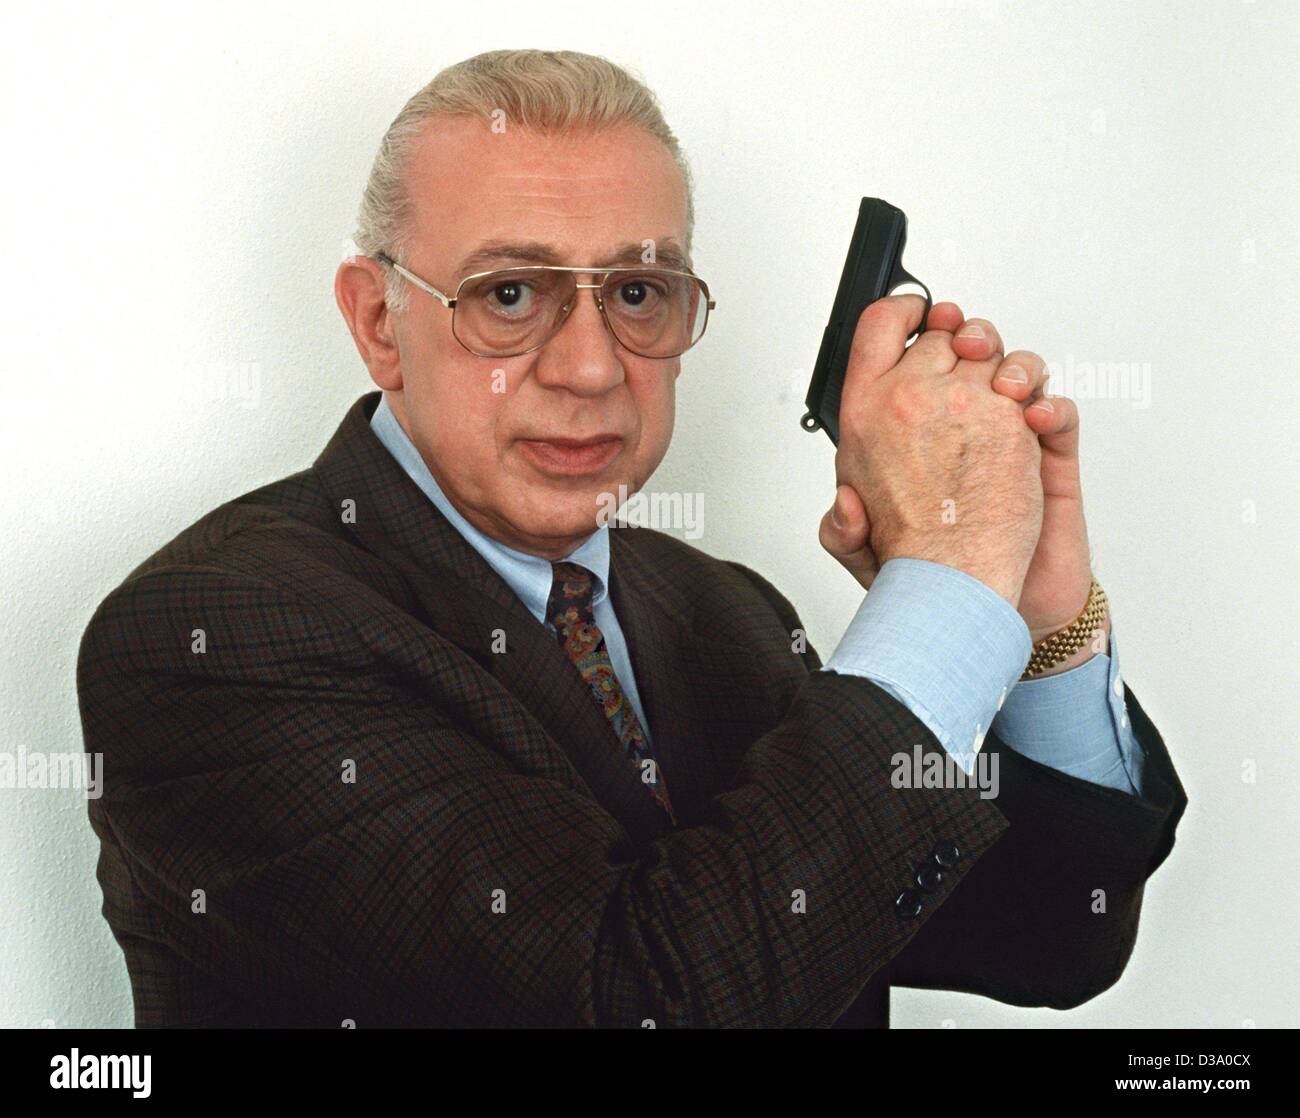 (dpa files) - Horst Tappert poses as Inspector Derrick in his famous German TV thriller series 'Derrick', April 1993. After 23 years and over 270 episodes the inspector's last case was filmed in December 1997. The crime series produced by German public television station ZDF is one of the most popul Stock Photo